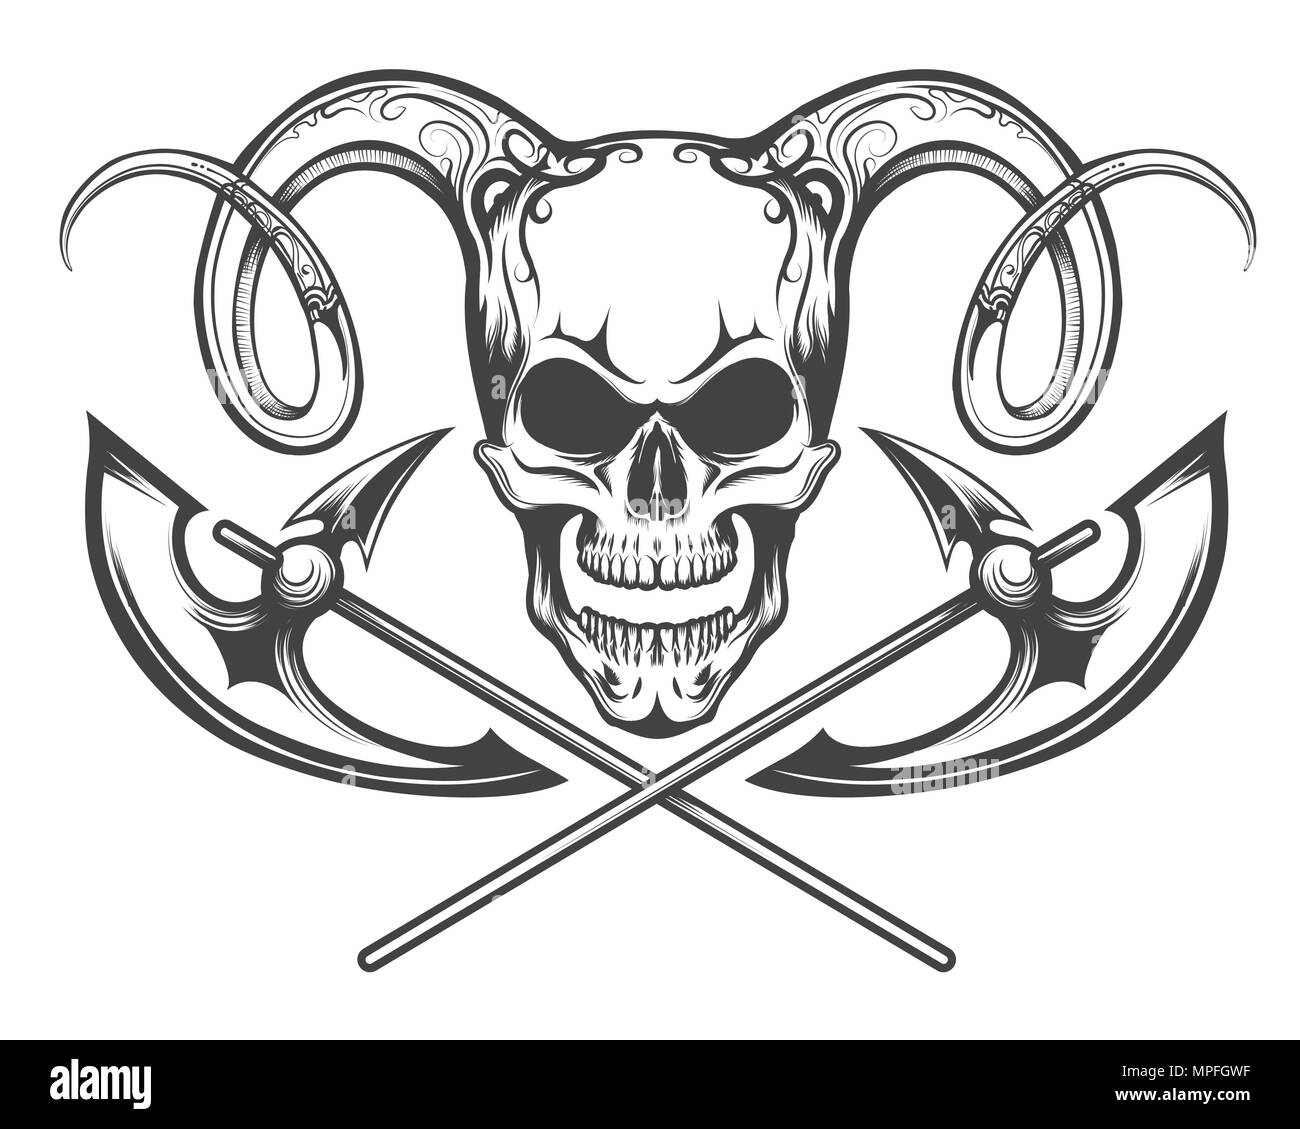 Human Skull with Ram Horns and Battle Axes. Vector illustration drawn in tattoo style. Stock Vector